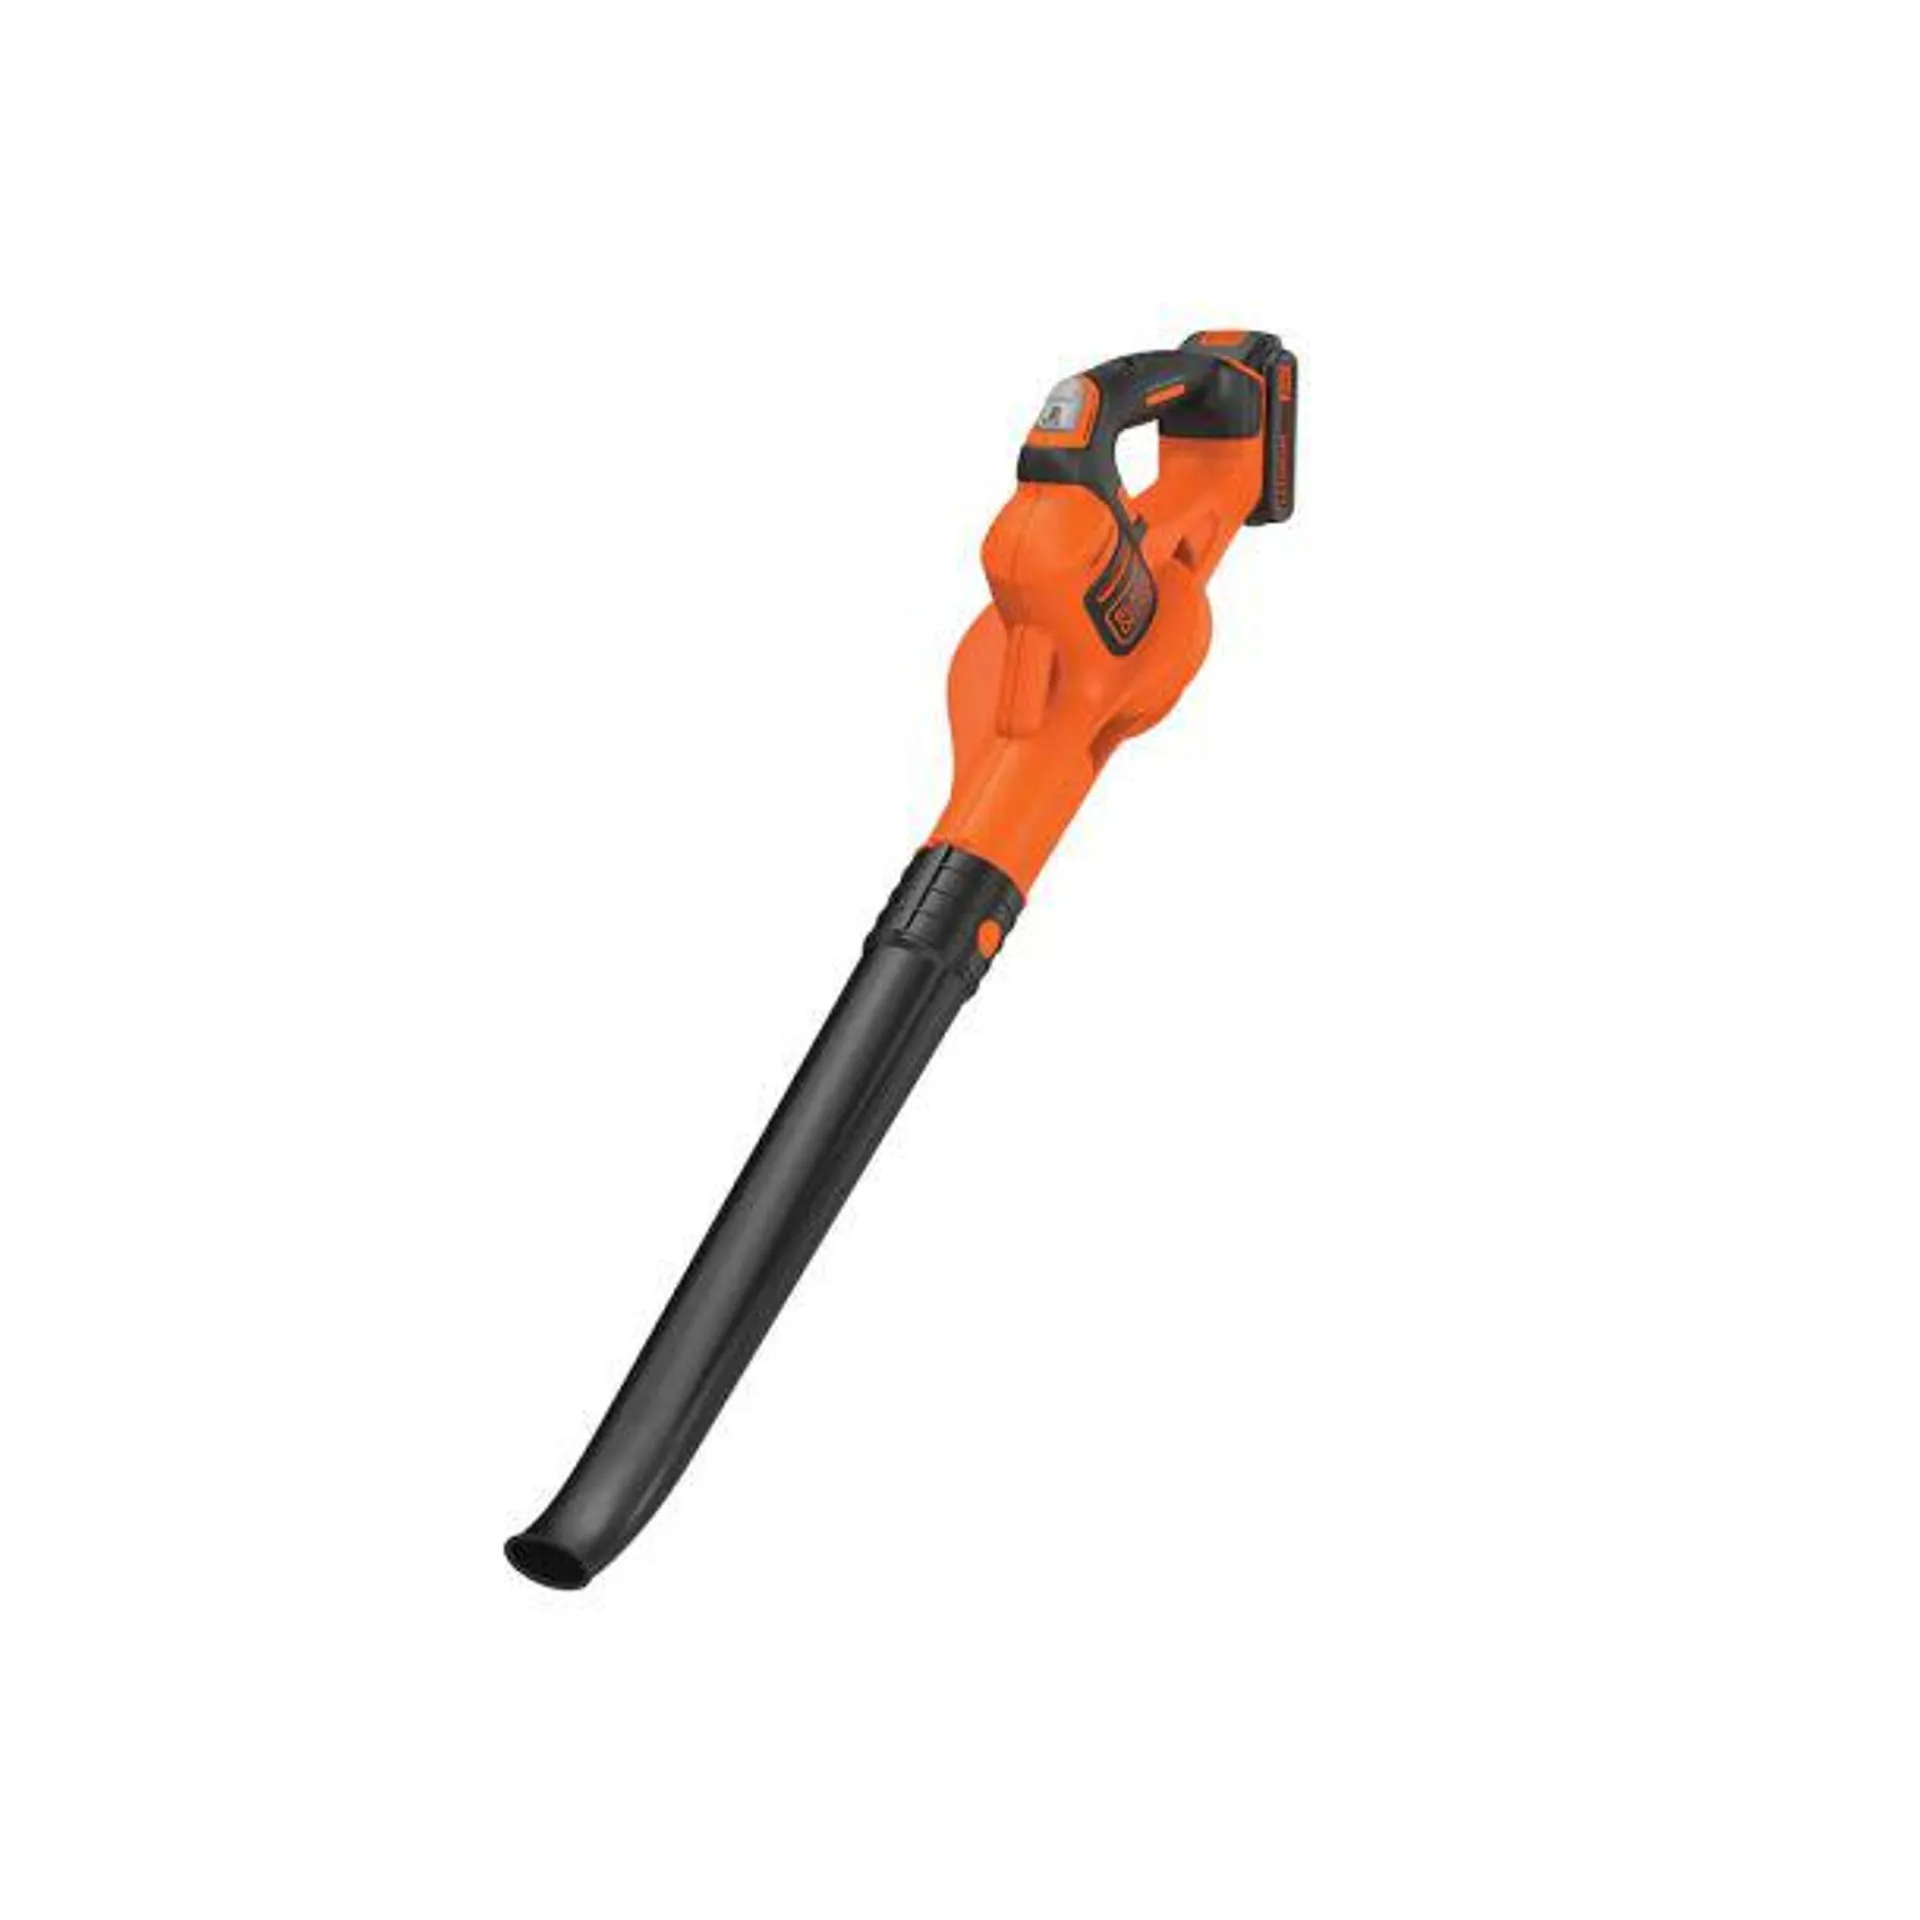 BLACK+DECKER 20V MAX Cordless Sweeper with Power Boost (LSW321)